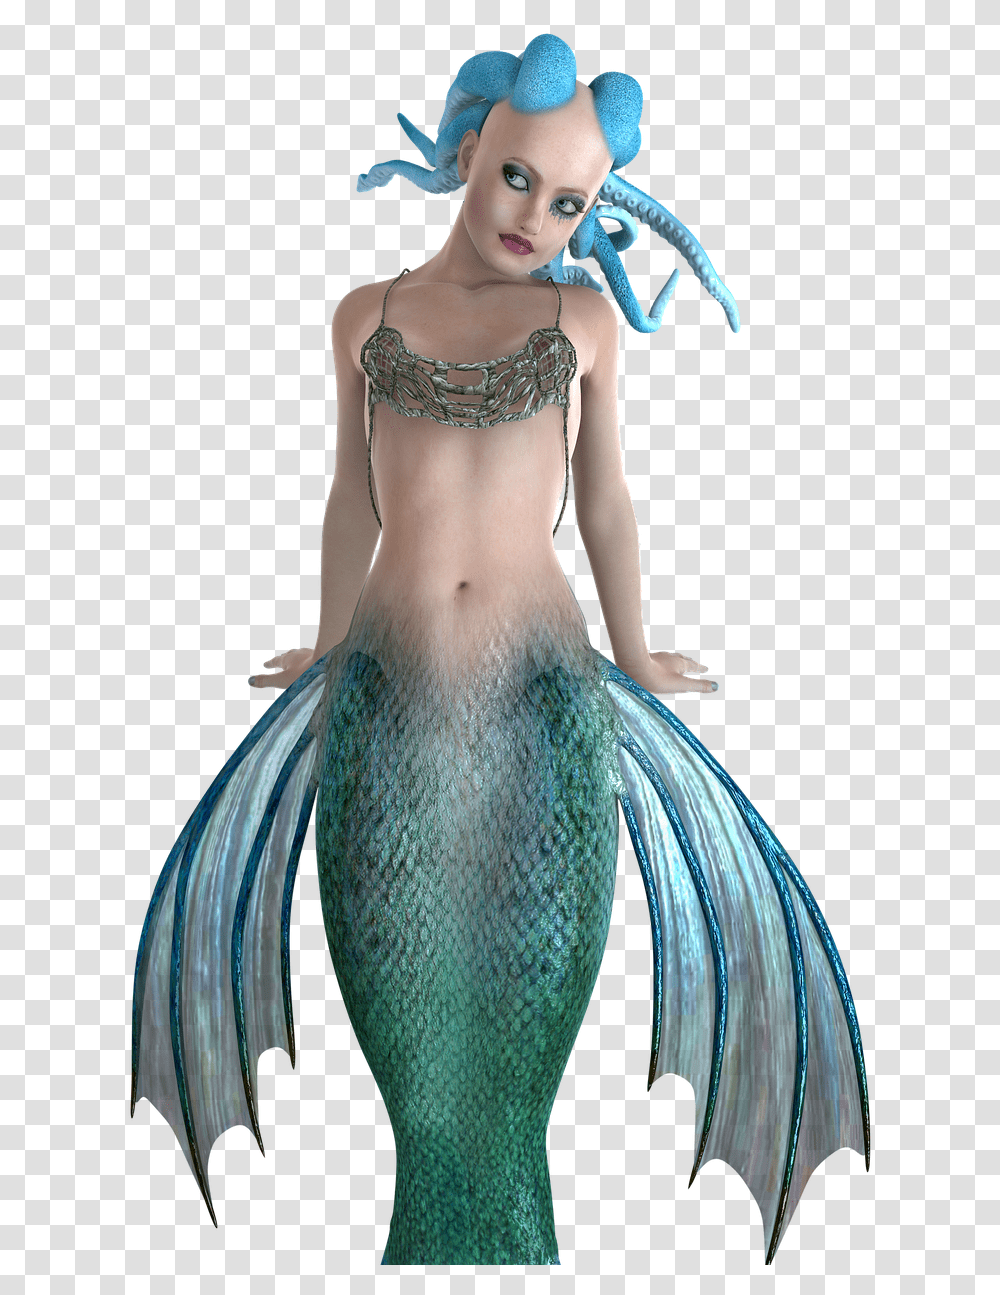 Woman Female Mermaid Free Image On Pixabay Woman In Water, Clothing, Person, Art, Graphics Transparent Png